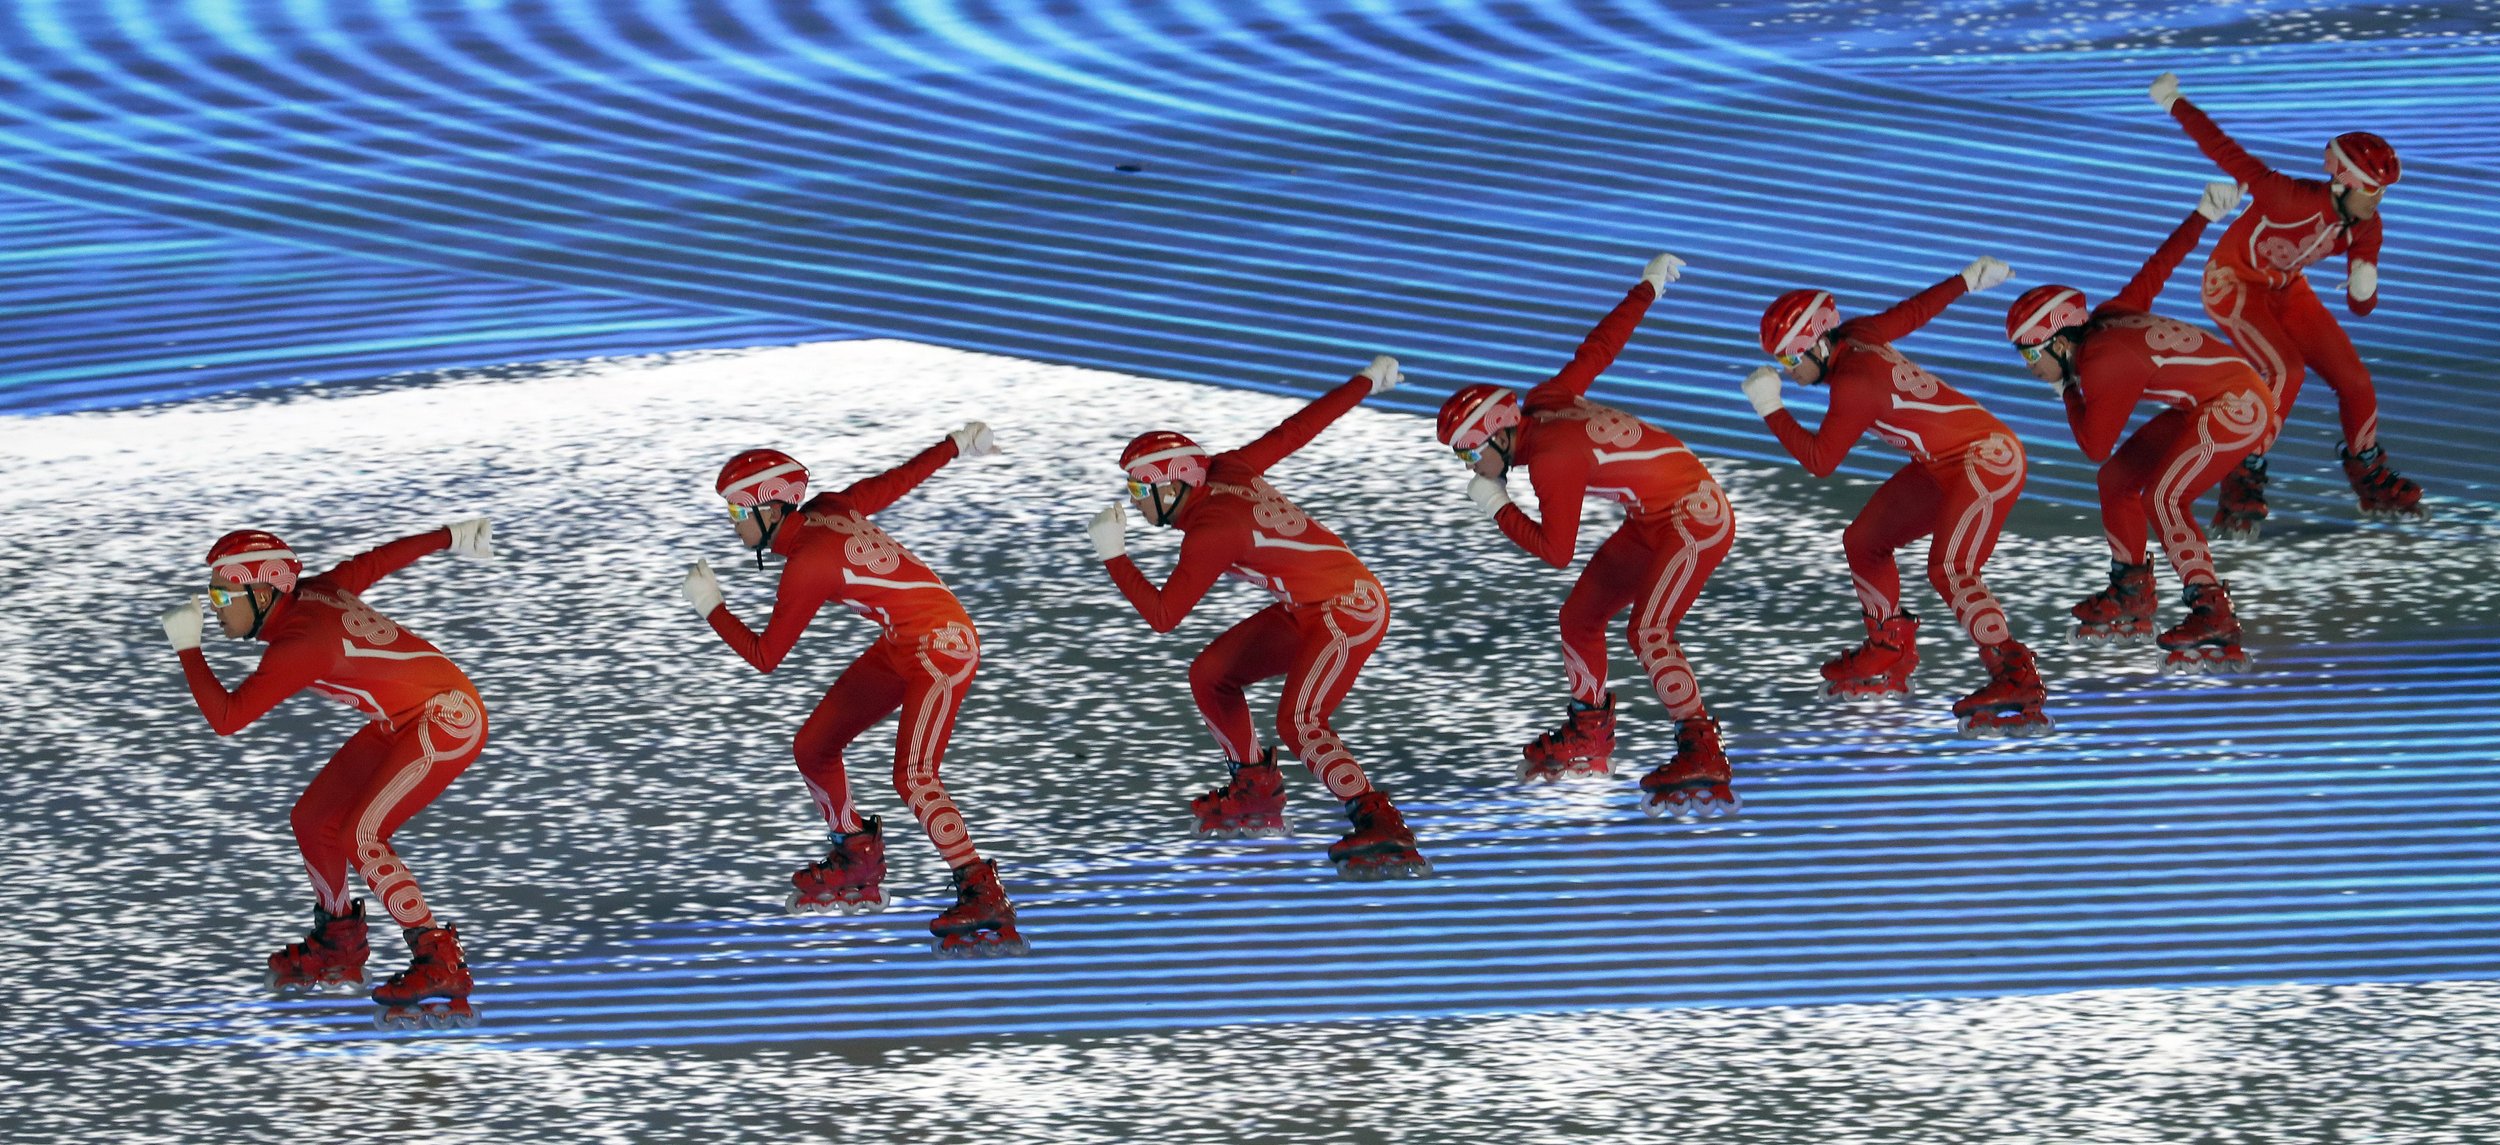  Rollerbladers surf across projections during the opening ceremony of the Beijing Olympic winter games. 